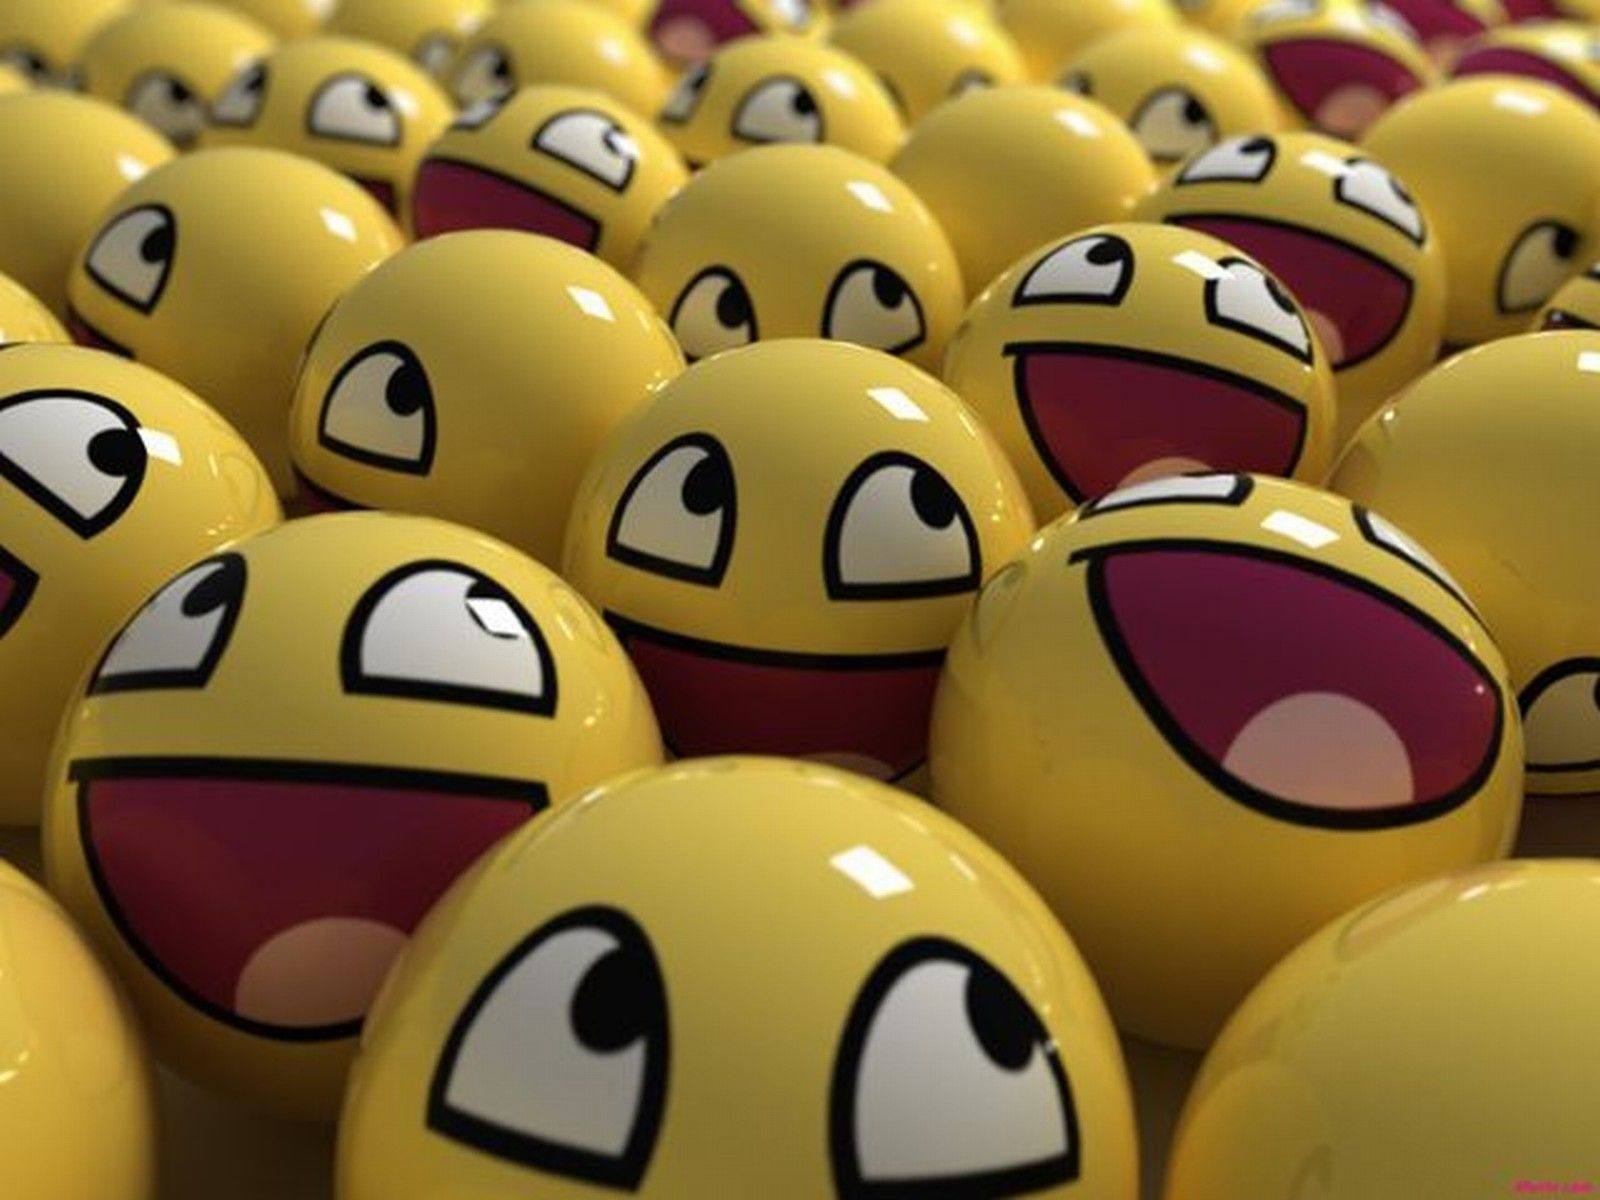 Wallpapers Of Smiley Faces